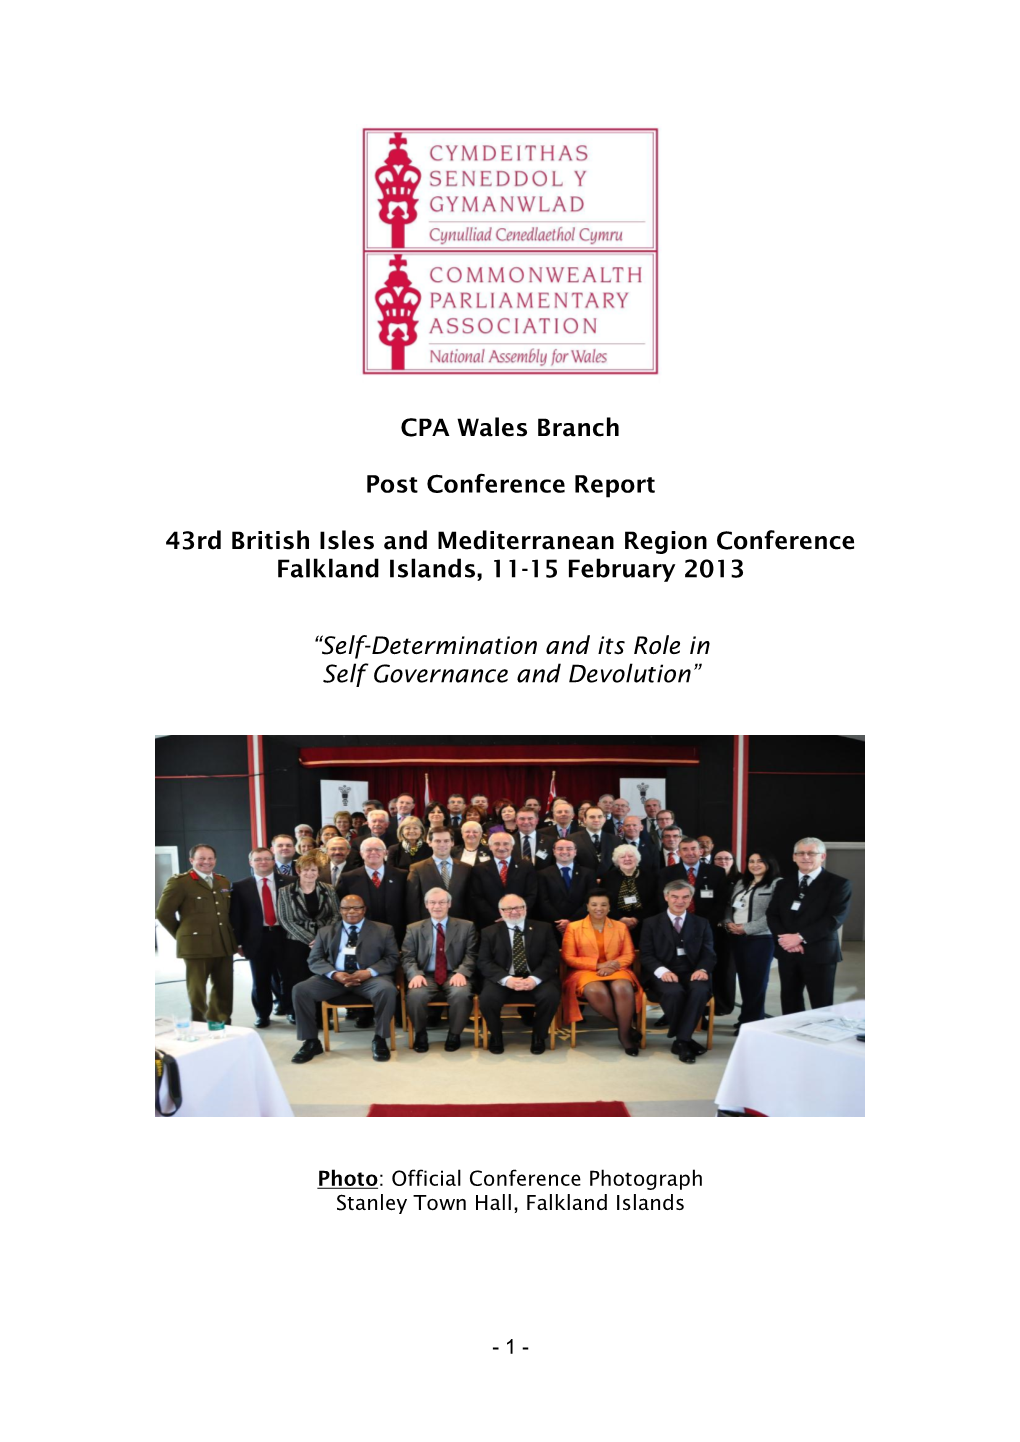 CPA Wales Branch Post Conference Report 43Rd British Isles And